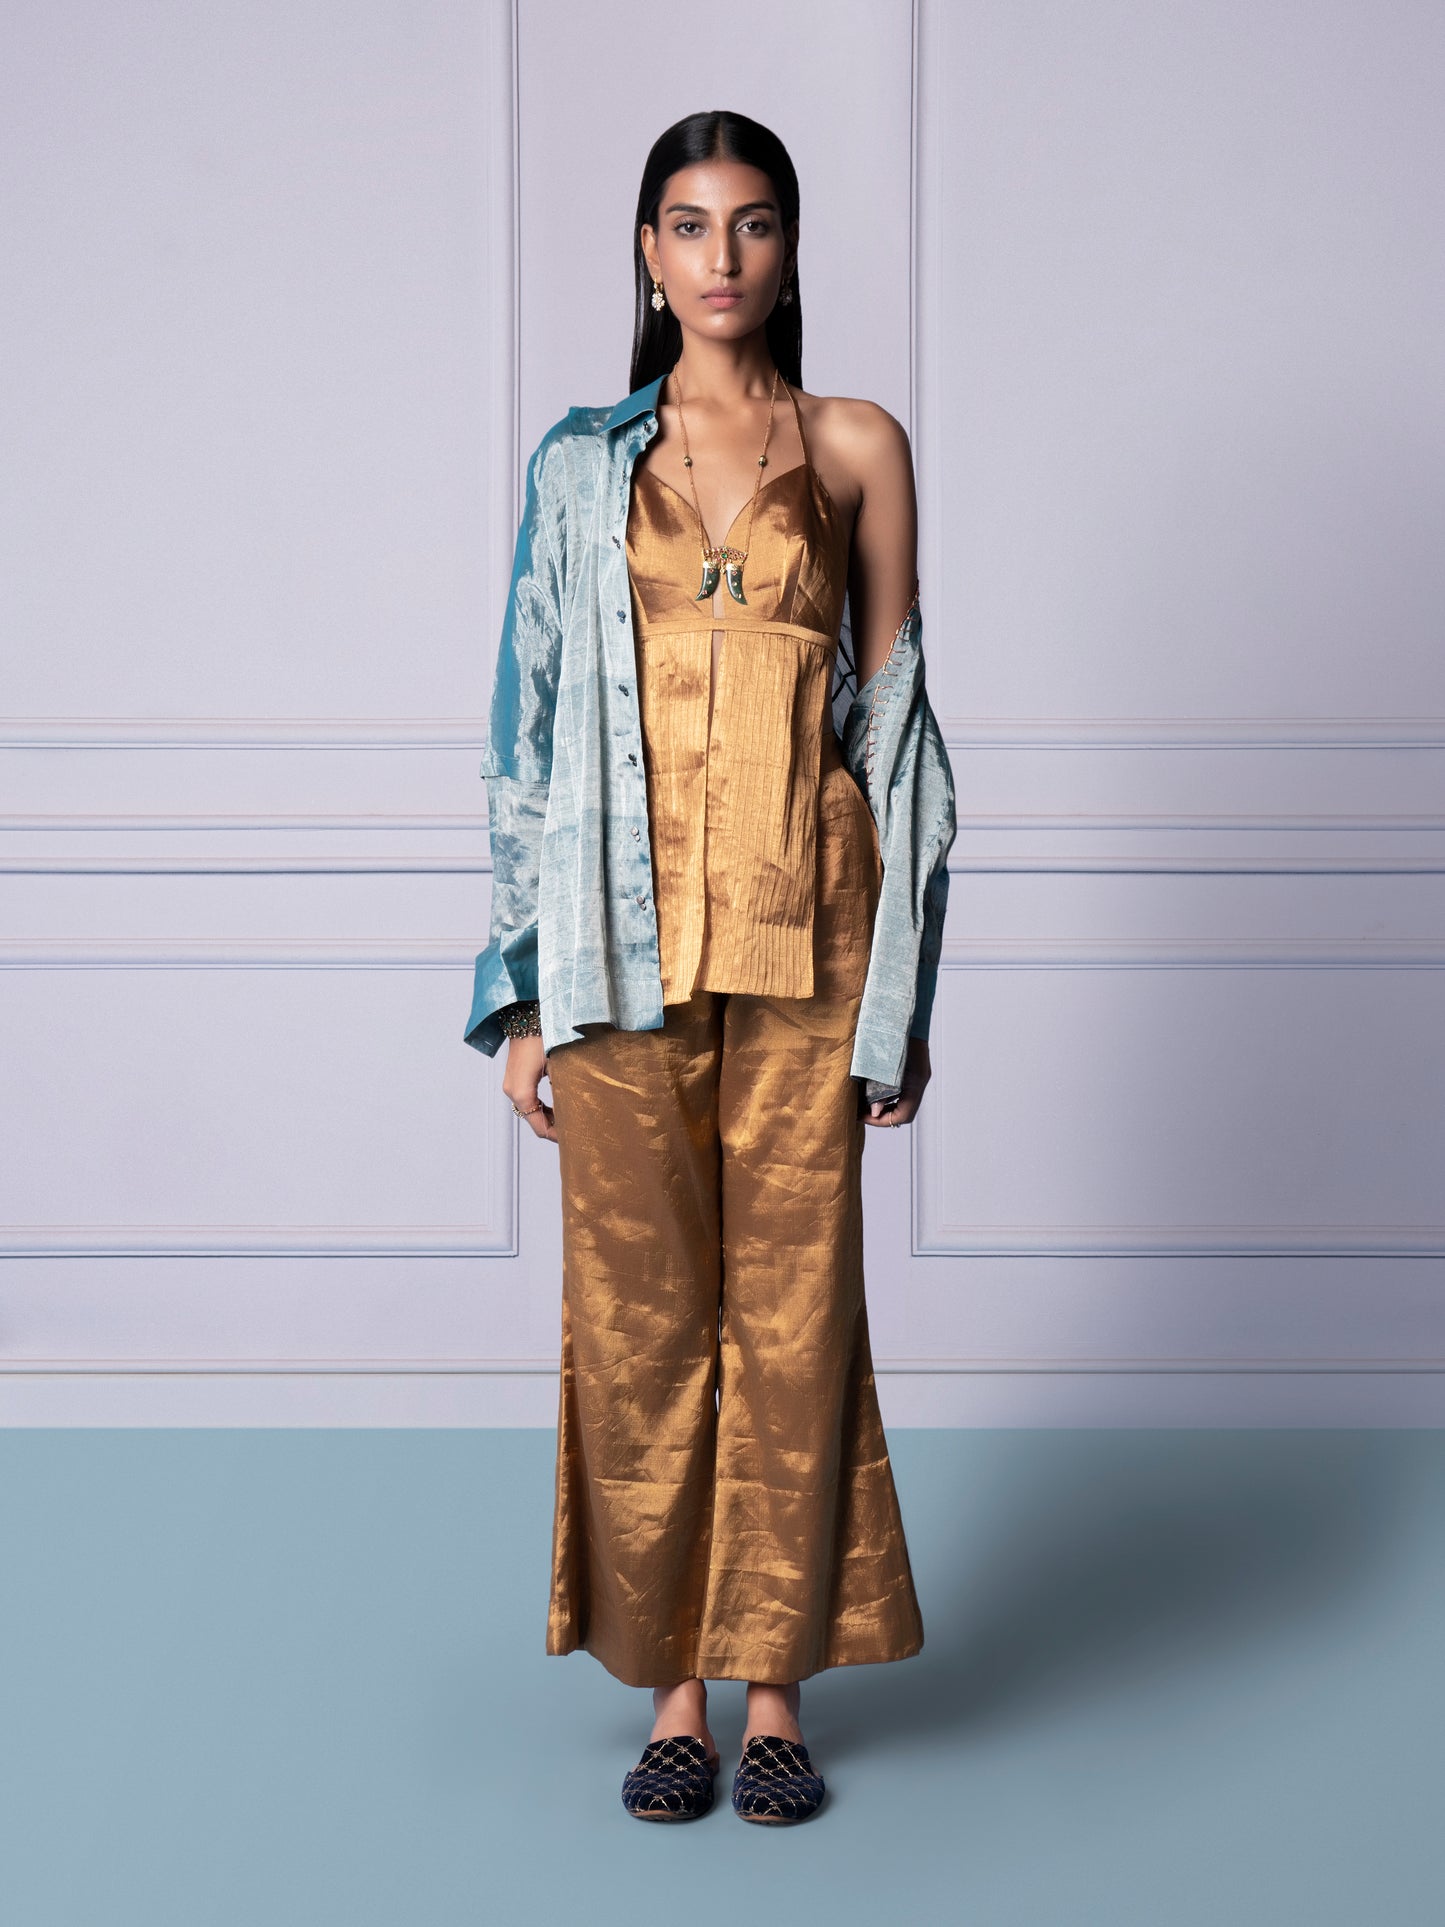 Gold Chanderi Bralette With Gold Chanderi Trousers And Blue Chanderi Shirt.